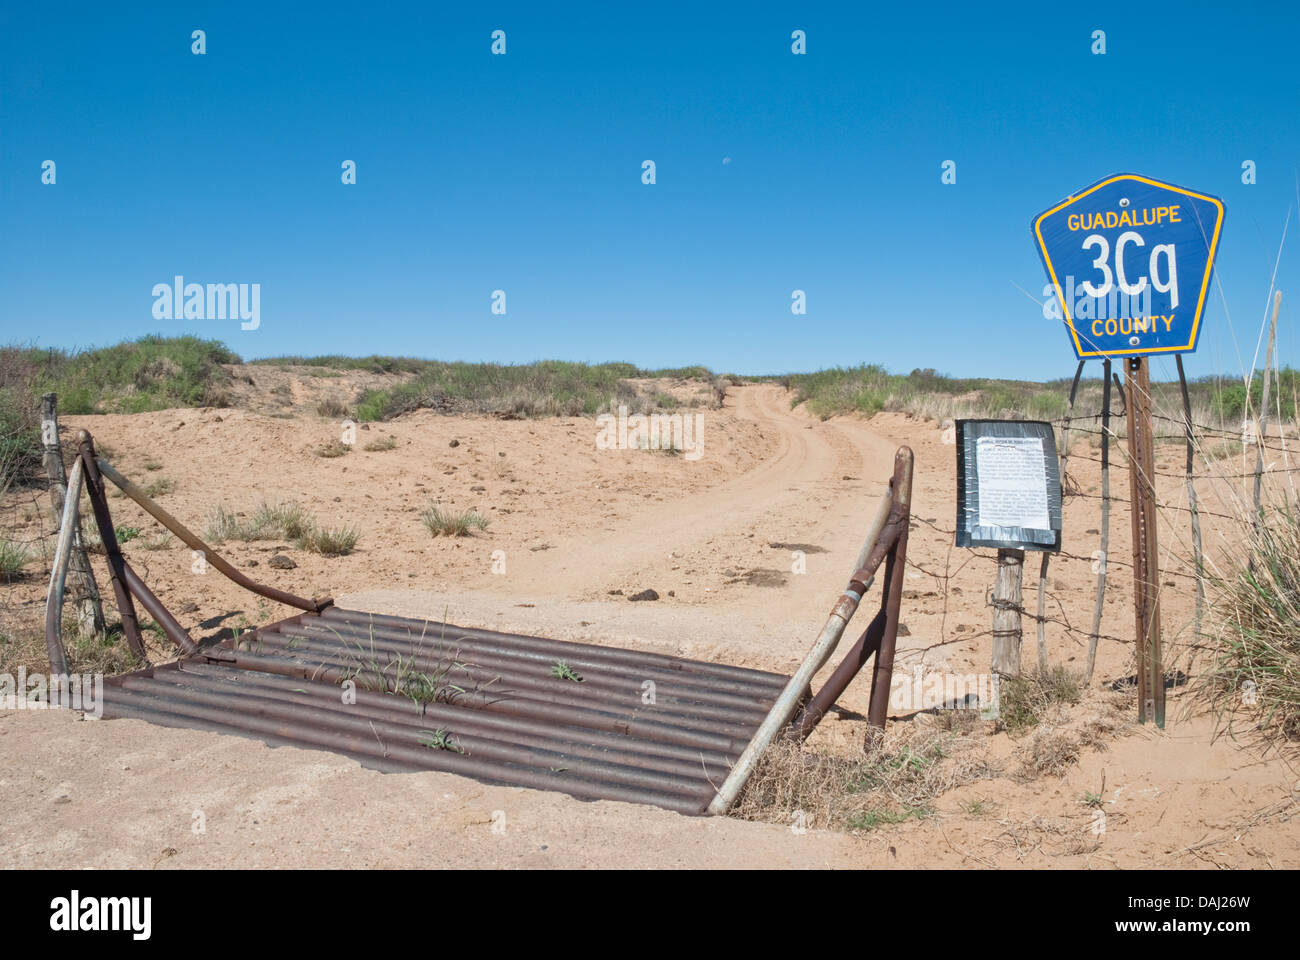 Route 3Cq in Guadalupe County, New Mexico provides a certain amount of motor trepidation. Stock Photo